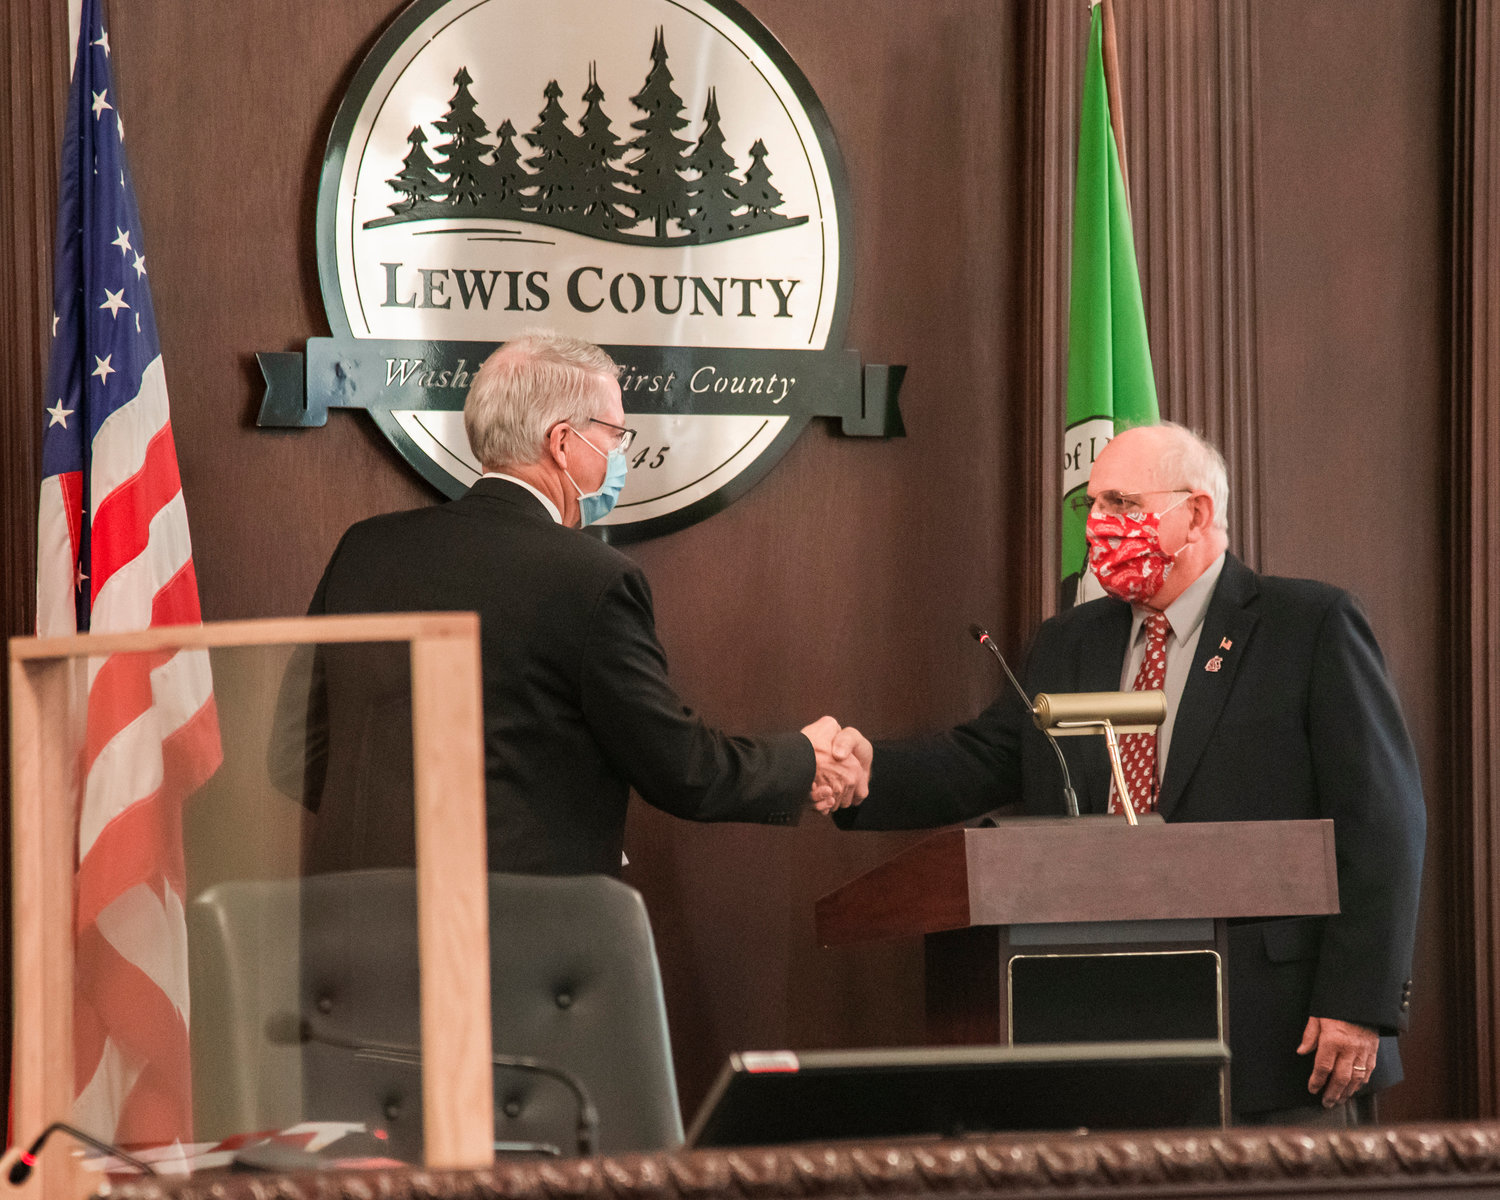 Judge James Lawler shakes hands with Commissioner Lee Grose Wednesday morning at the Historic Lewis County Courthouse in Chehalis.